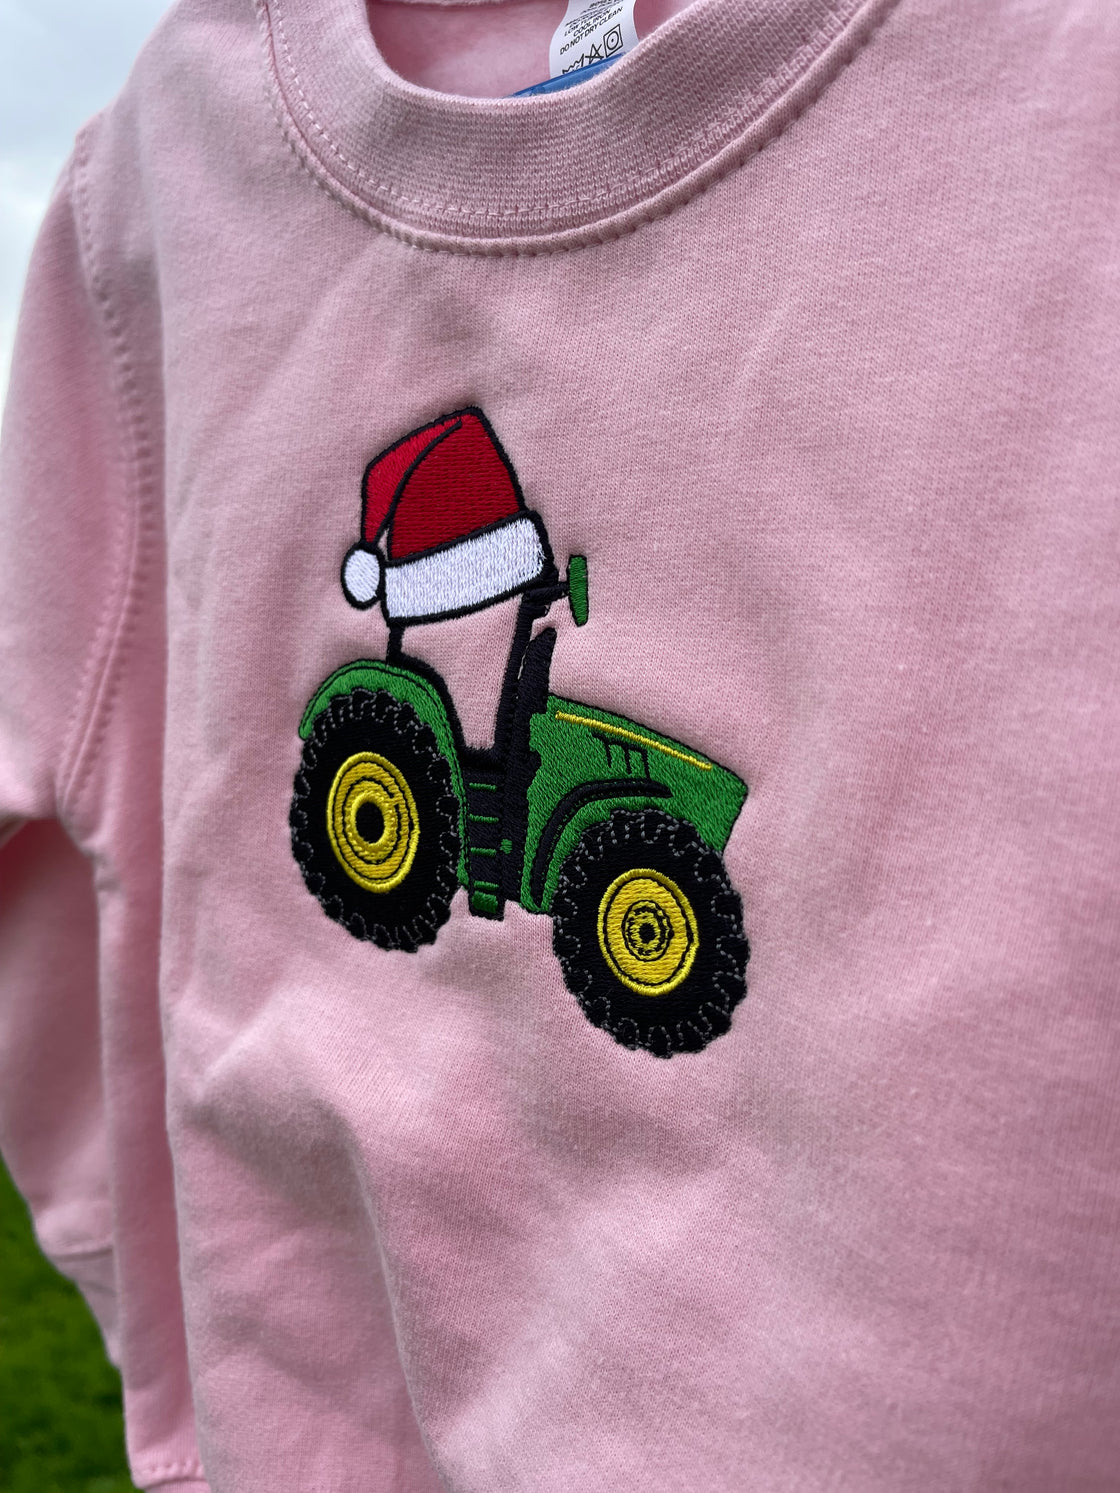 Christmas Sweatshirt Embroidered With Tractor Santa Hat Design